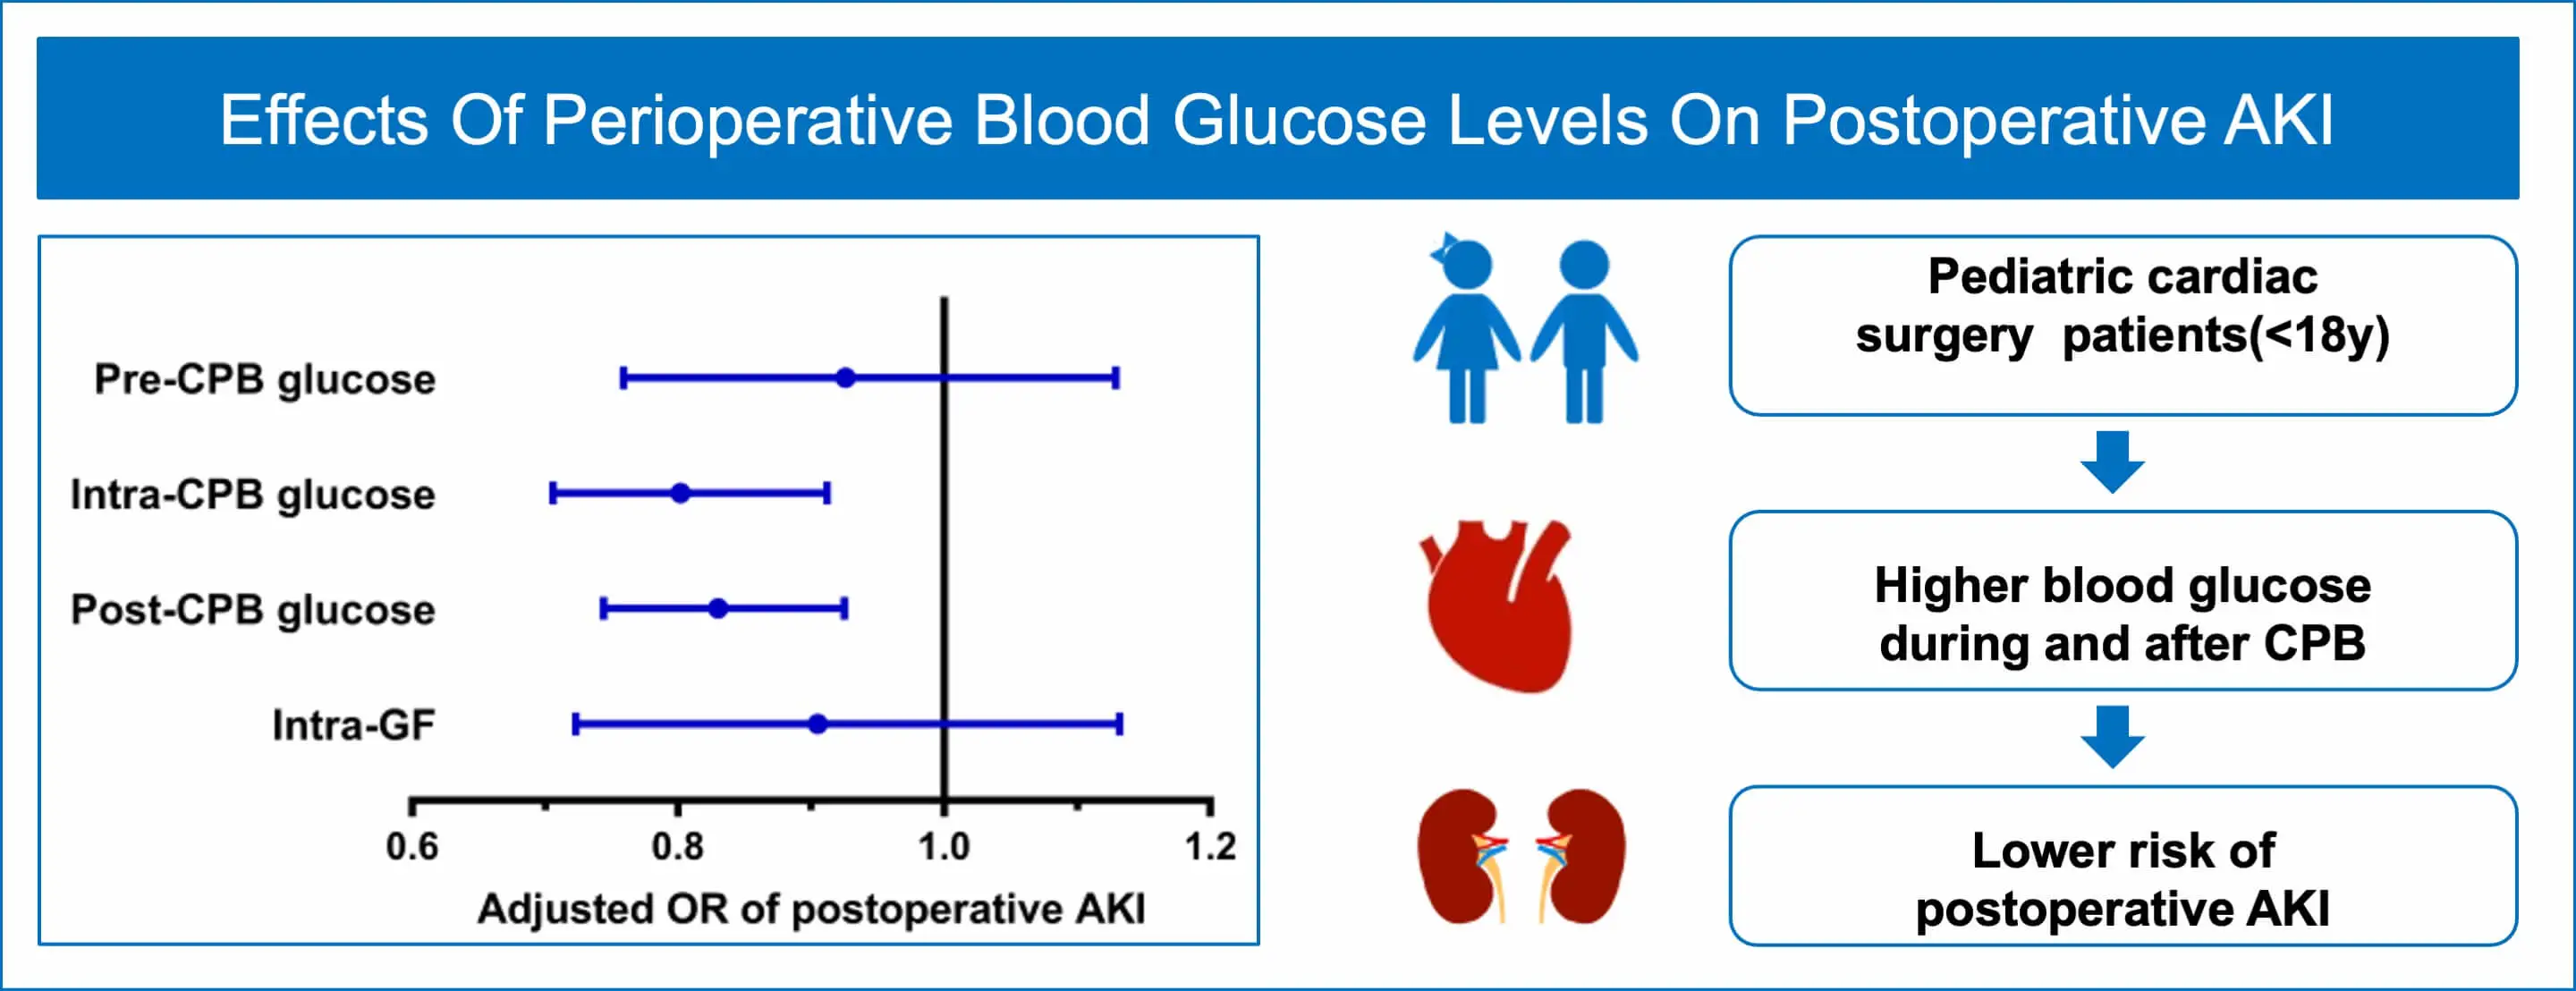 Intraoperative Blood Glucose Levels and Postoperative Acute Kidney Injury in Pediatric Patients Having Congenital Heart Surgery under Cardiopulmonary Bypass